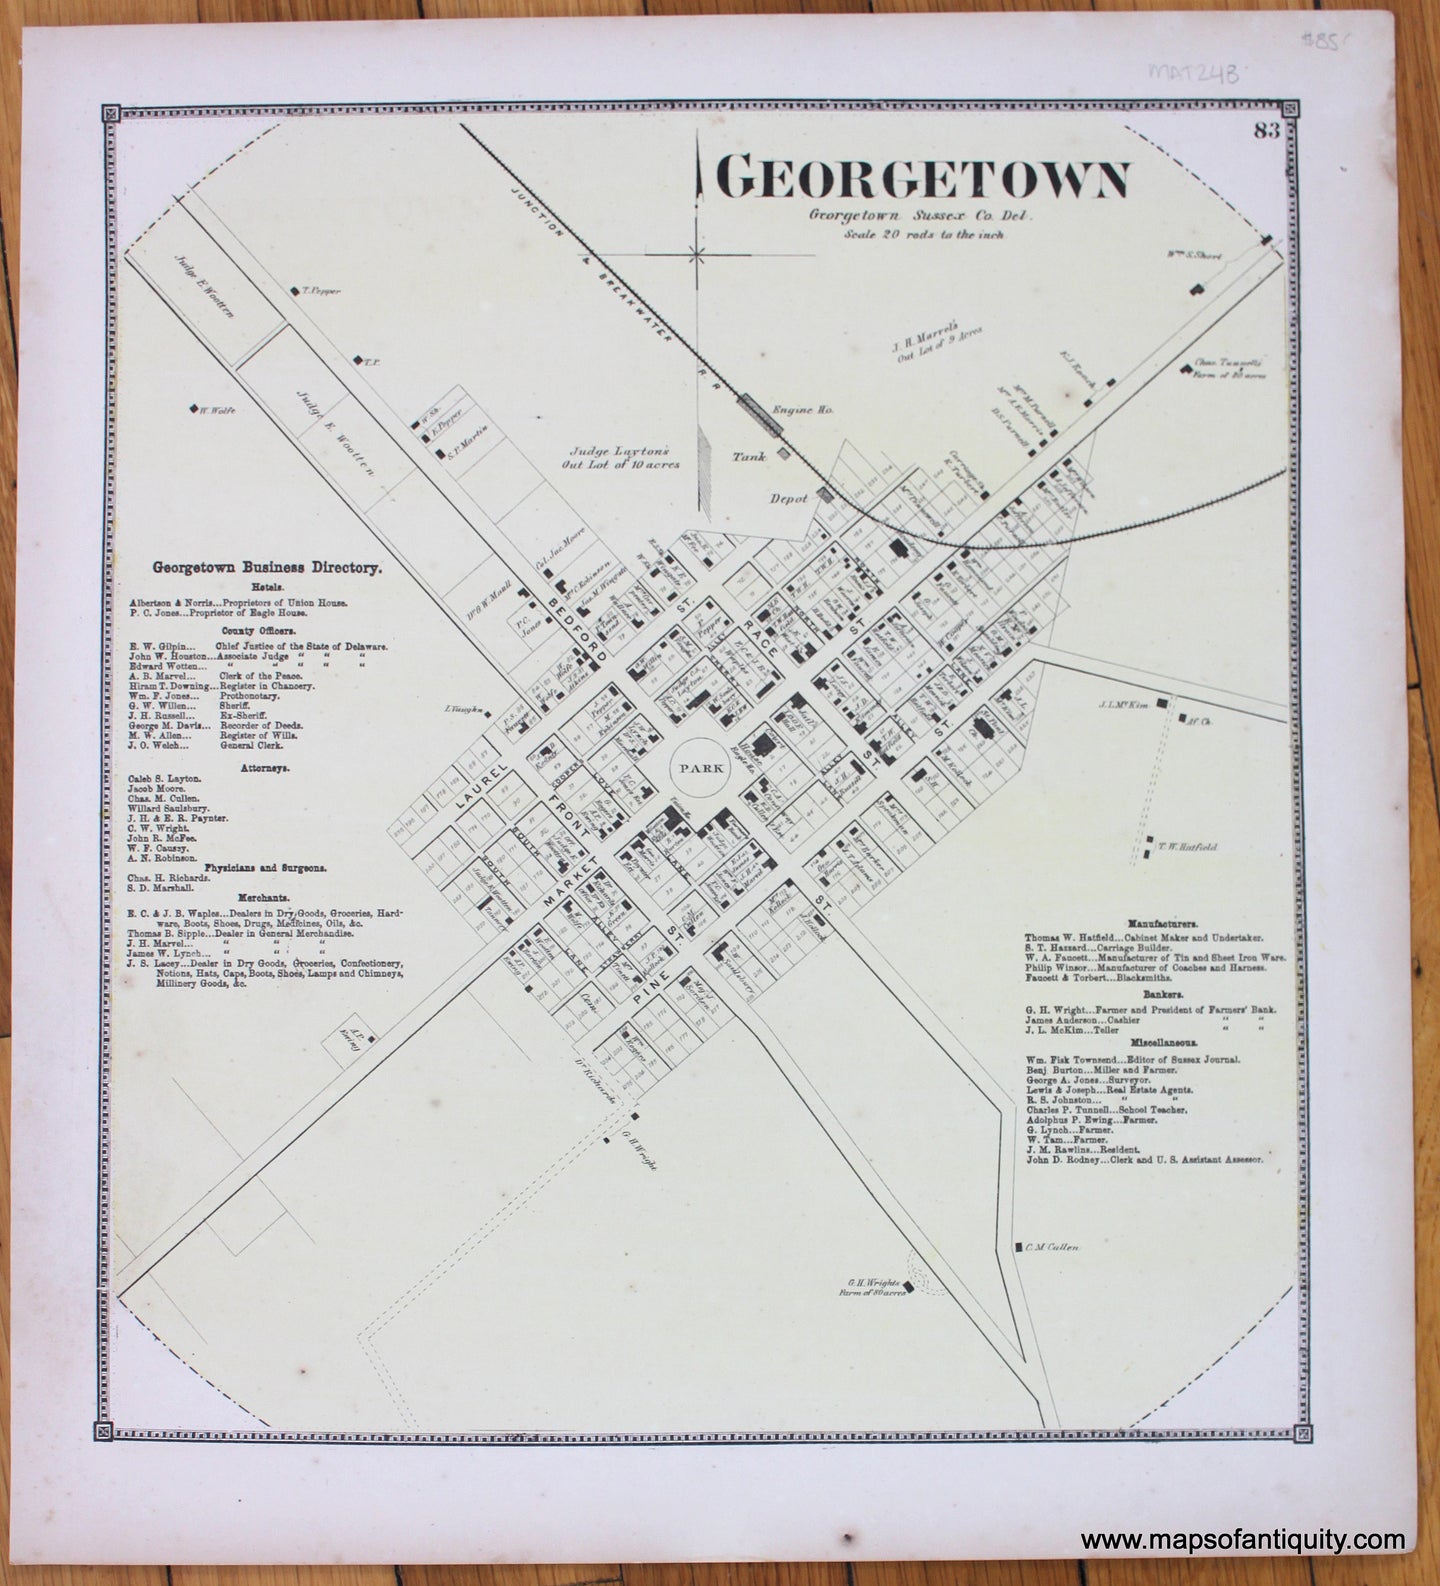 Georgetown-Antique-Map-1868-Beers-1860s-1800s-19th-century-Maps-of-Antiquity